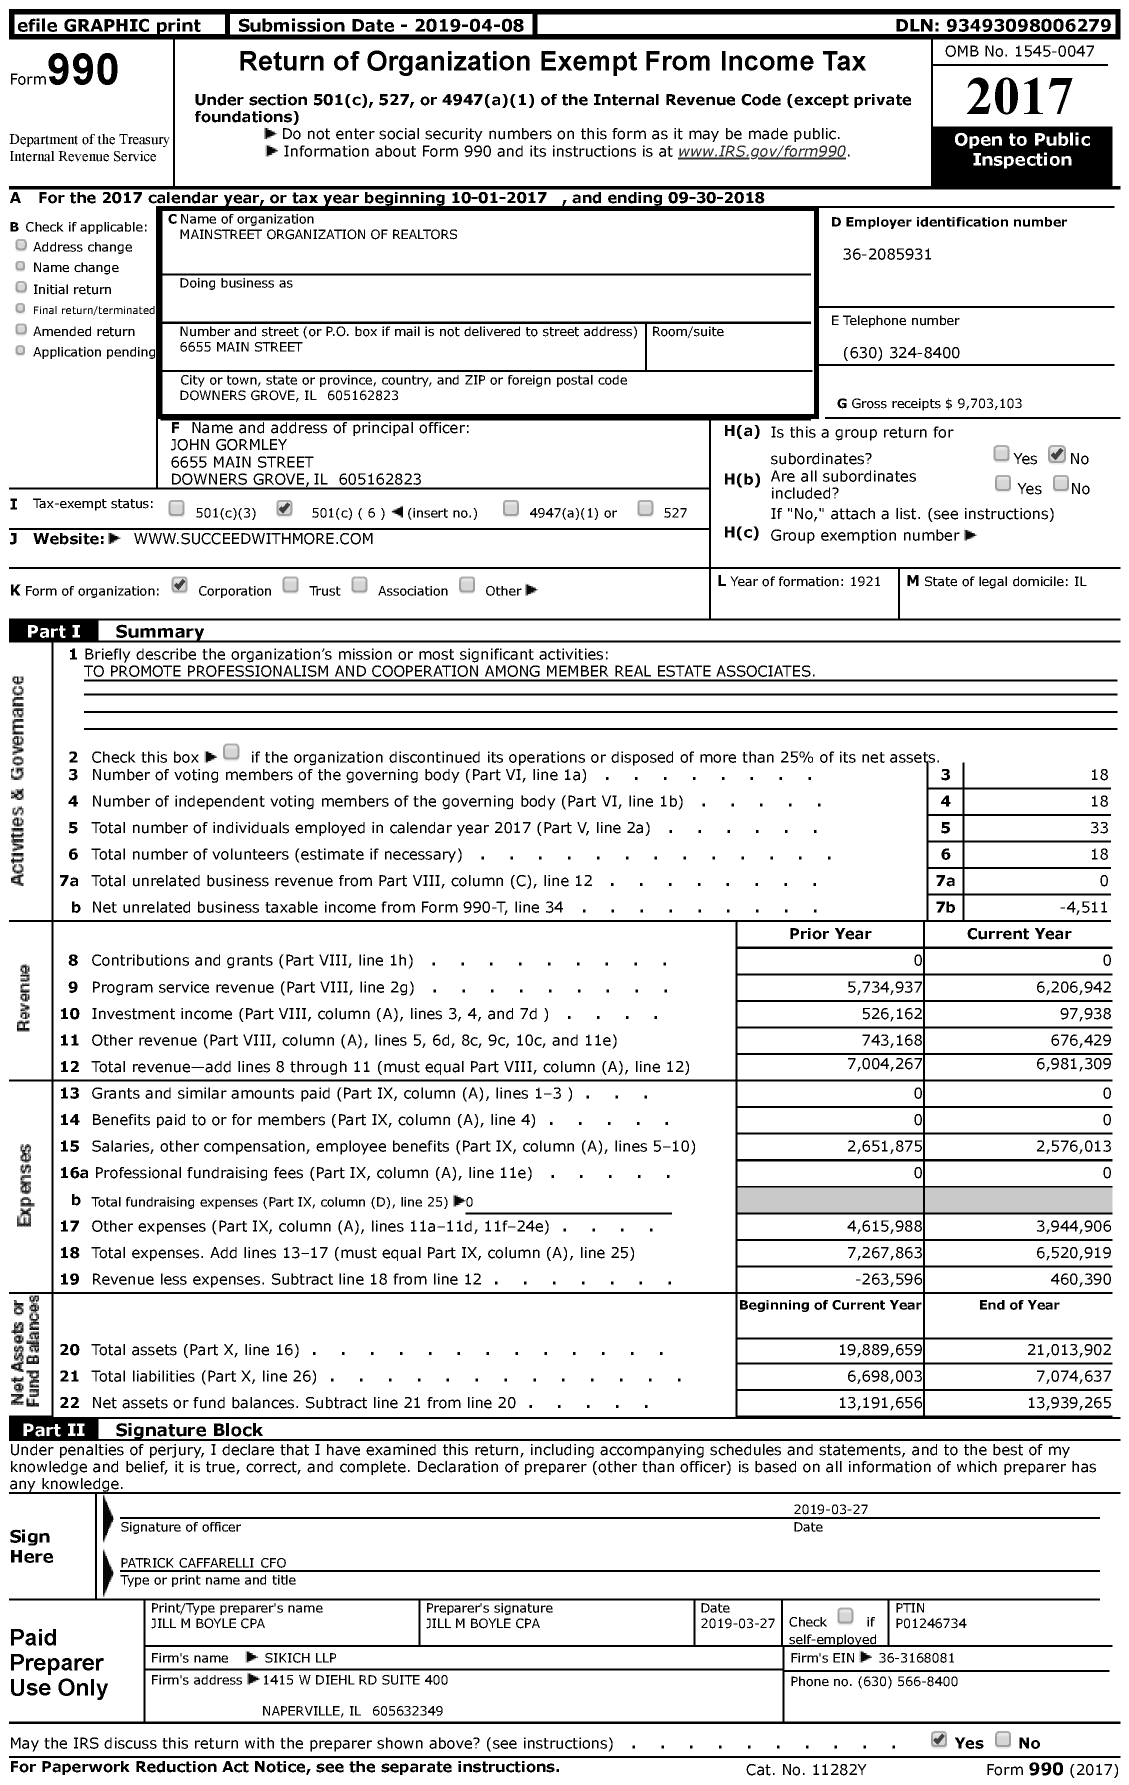 Image of first page of 2017 Form 990 for Mainstreet Organization of Realtors (MOR)